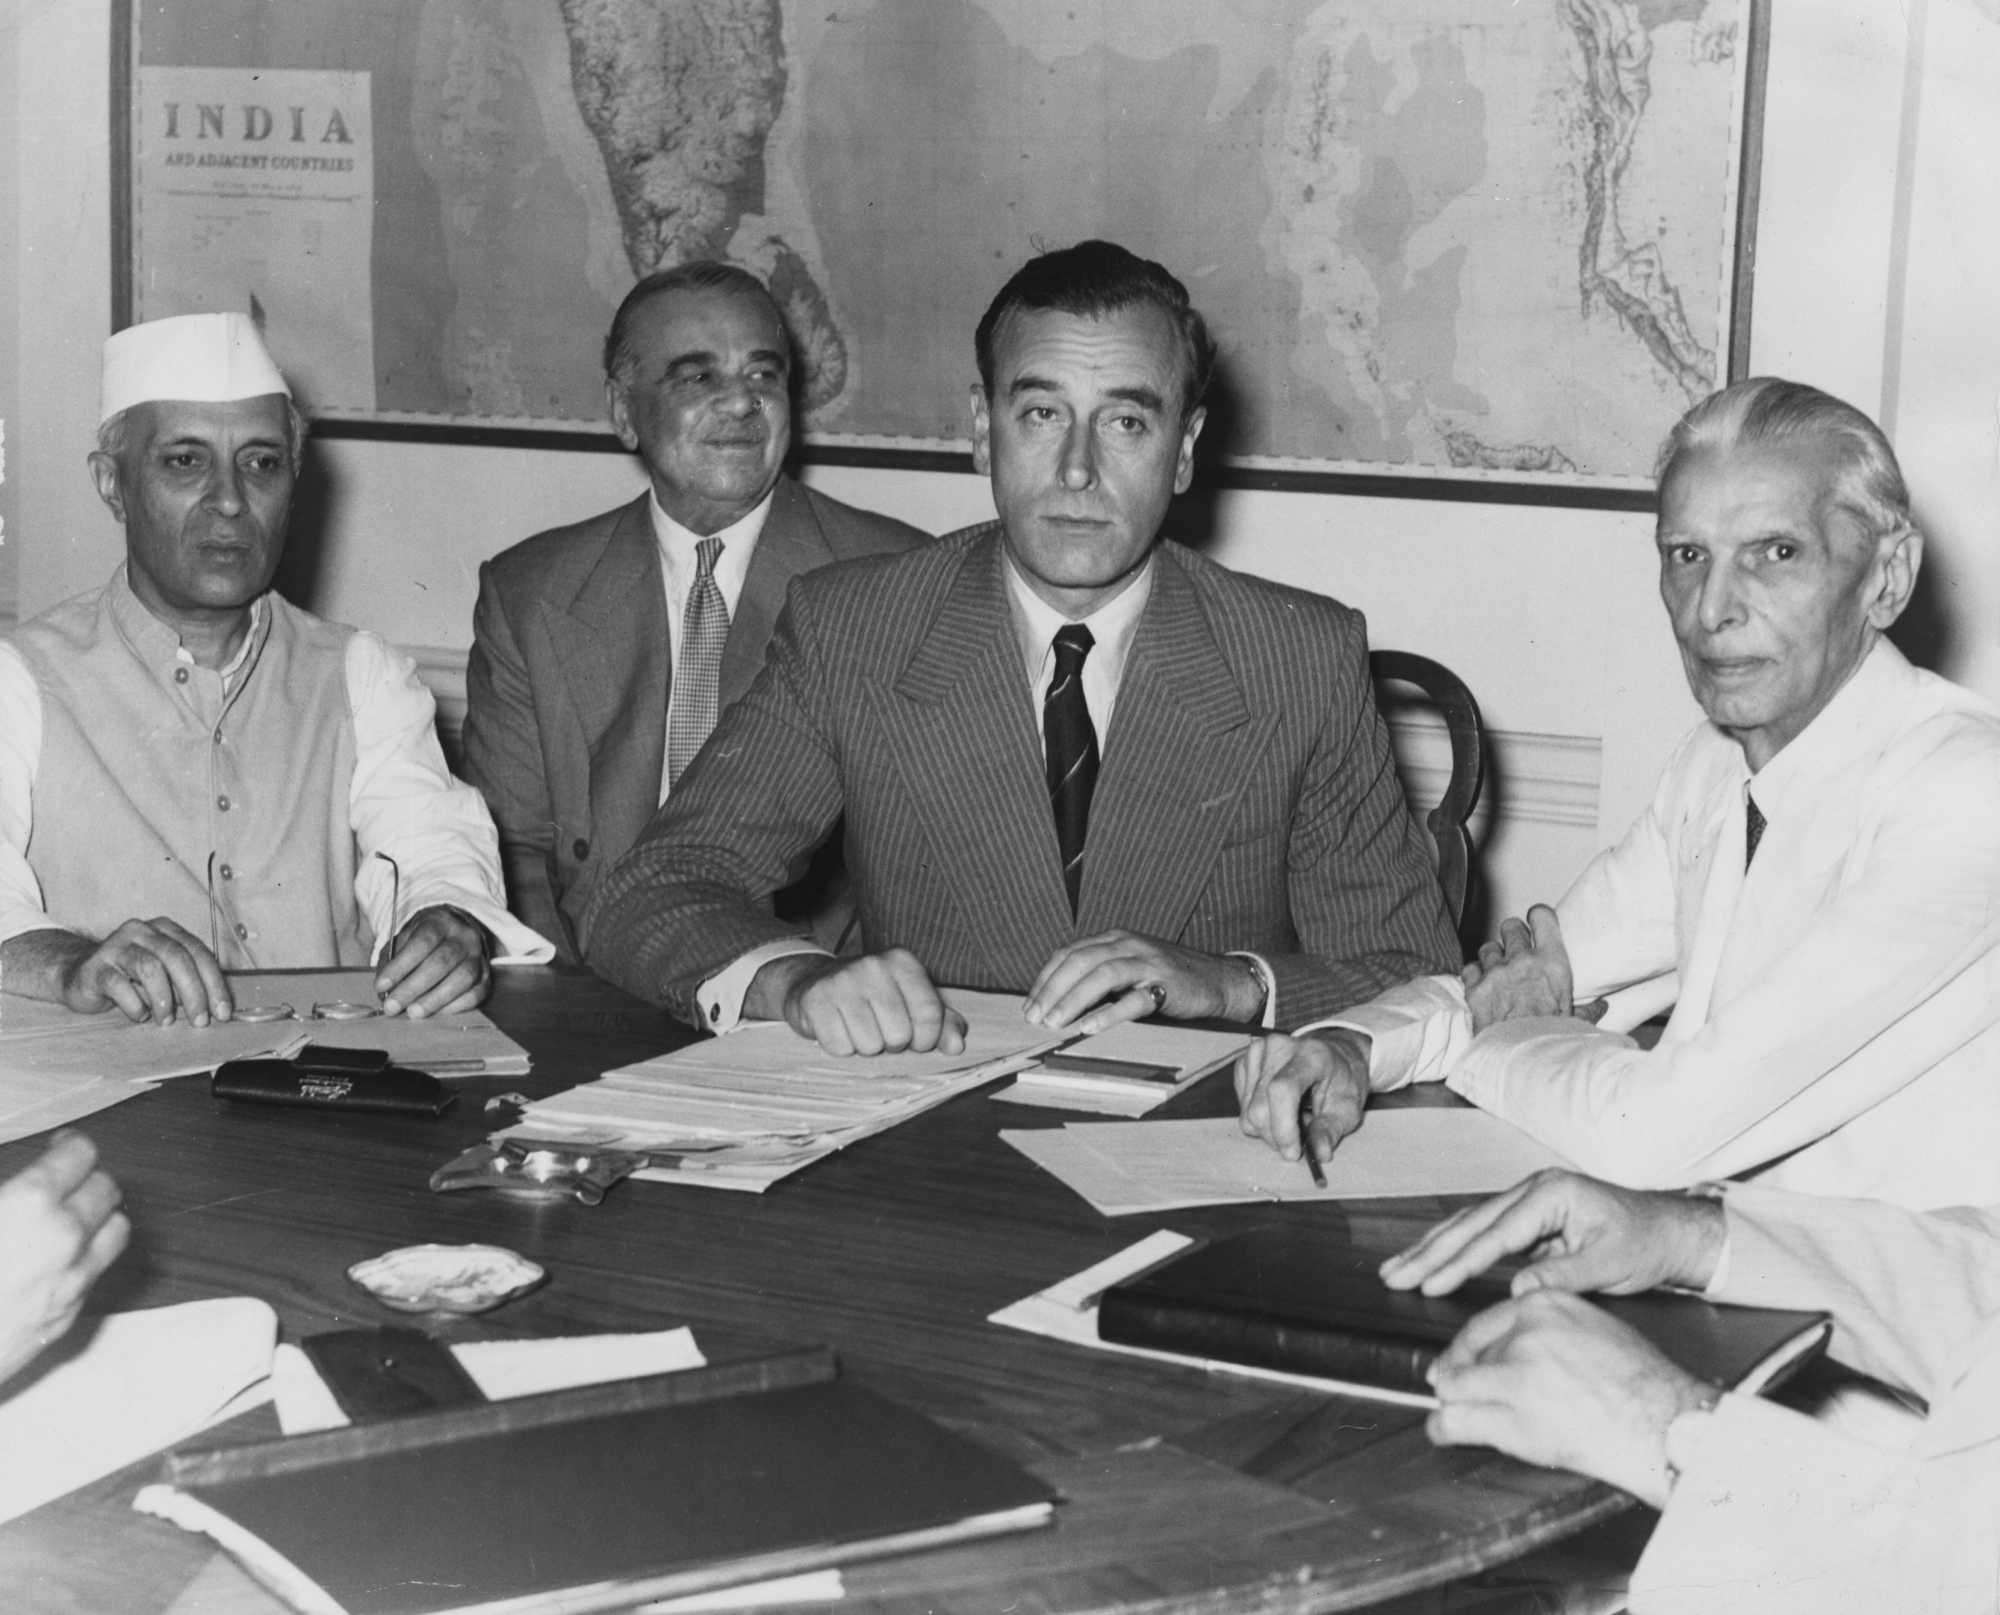 Jinnah (right) discusses Partition with (from left) the Indian nationalist leader Jawaharlal Nehru, Lord Ismay and Lord Mountbatten, Viceroy of India, June 1947.